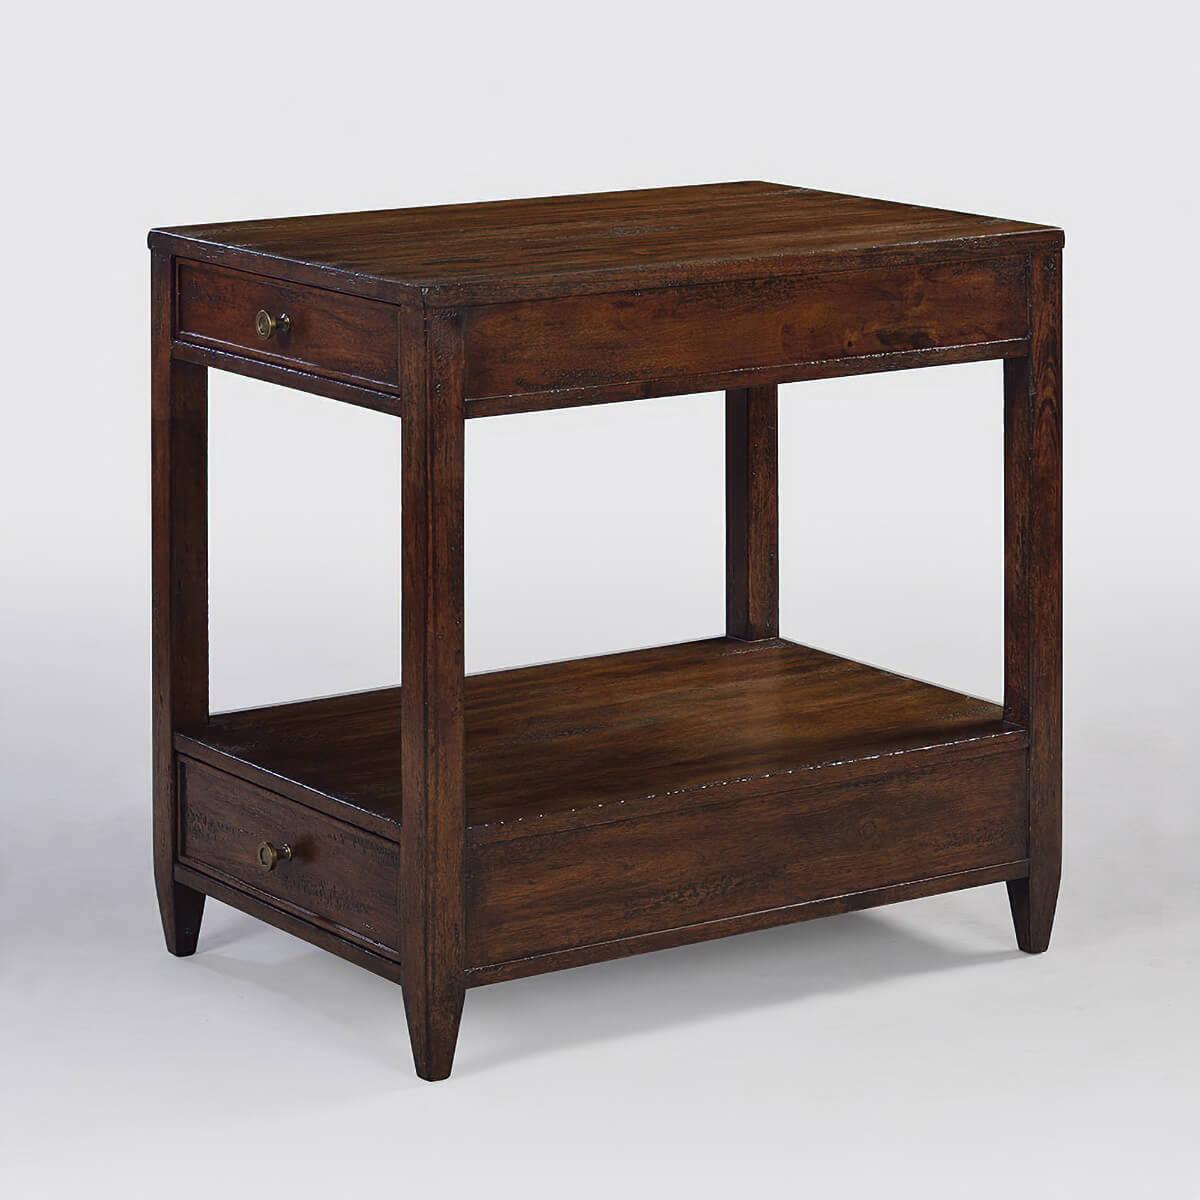 Neoclassical Classic Narrow Side Table, Mahogany Finish For Sale